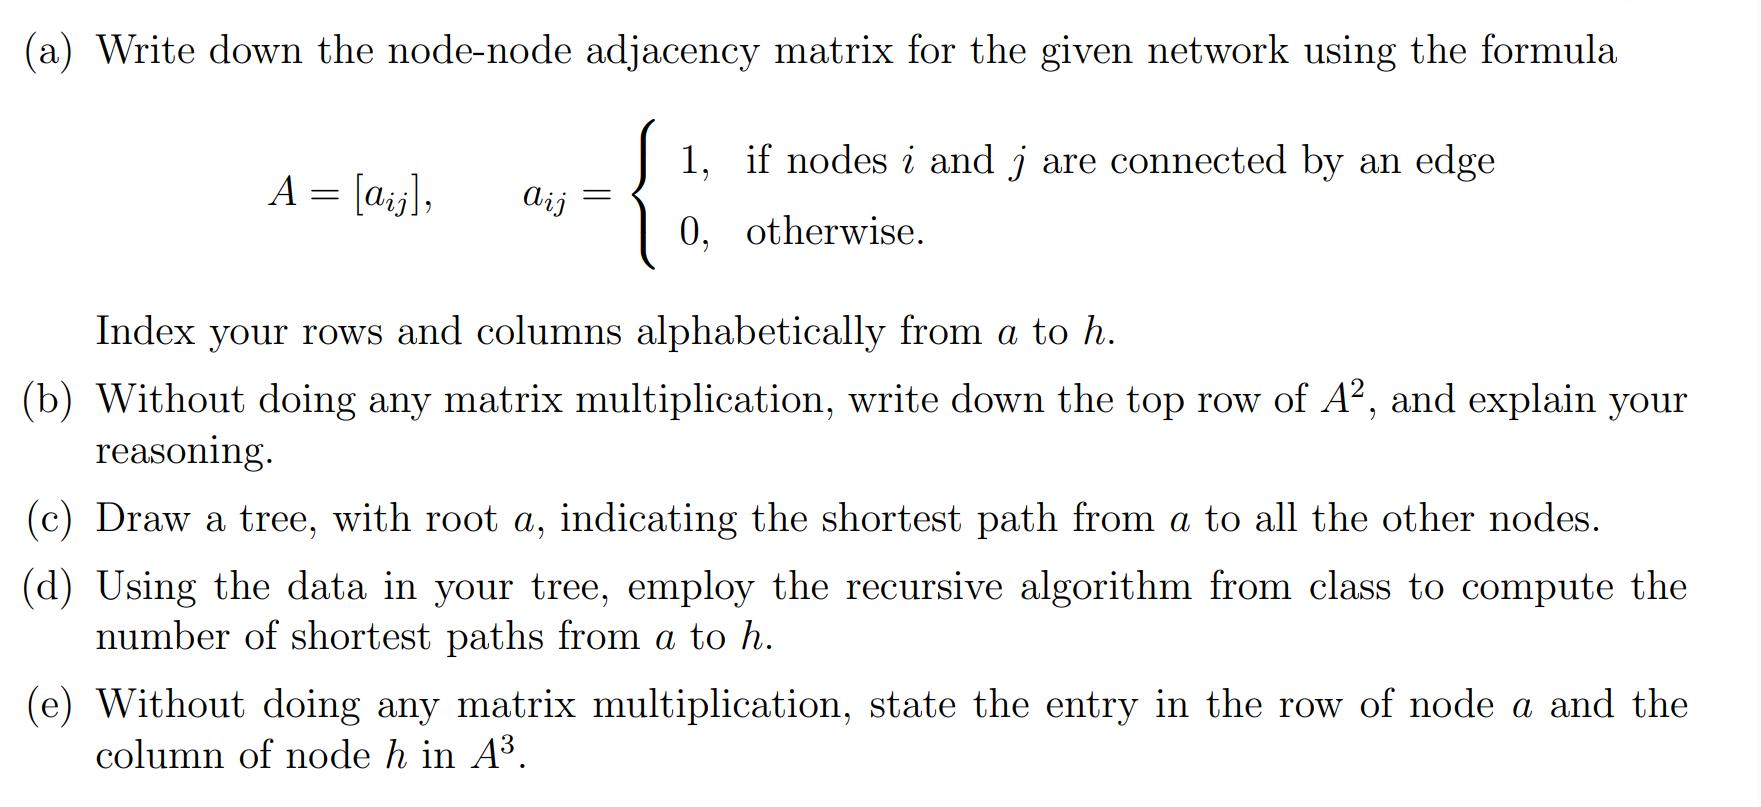 (a) Write down the node-node adjacency matrix for the given network using the formula 1, if nodes i and j are